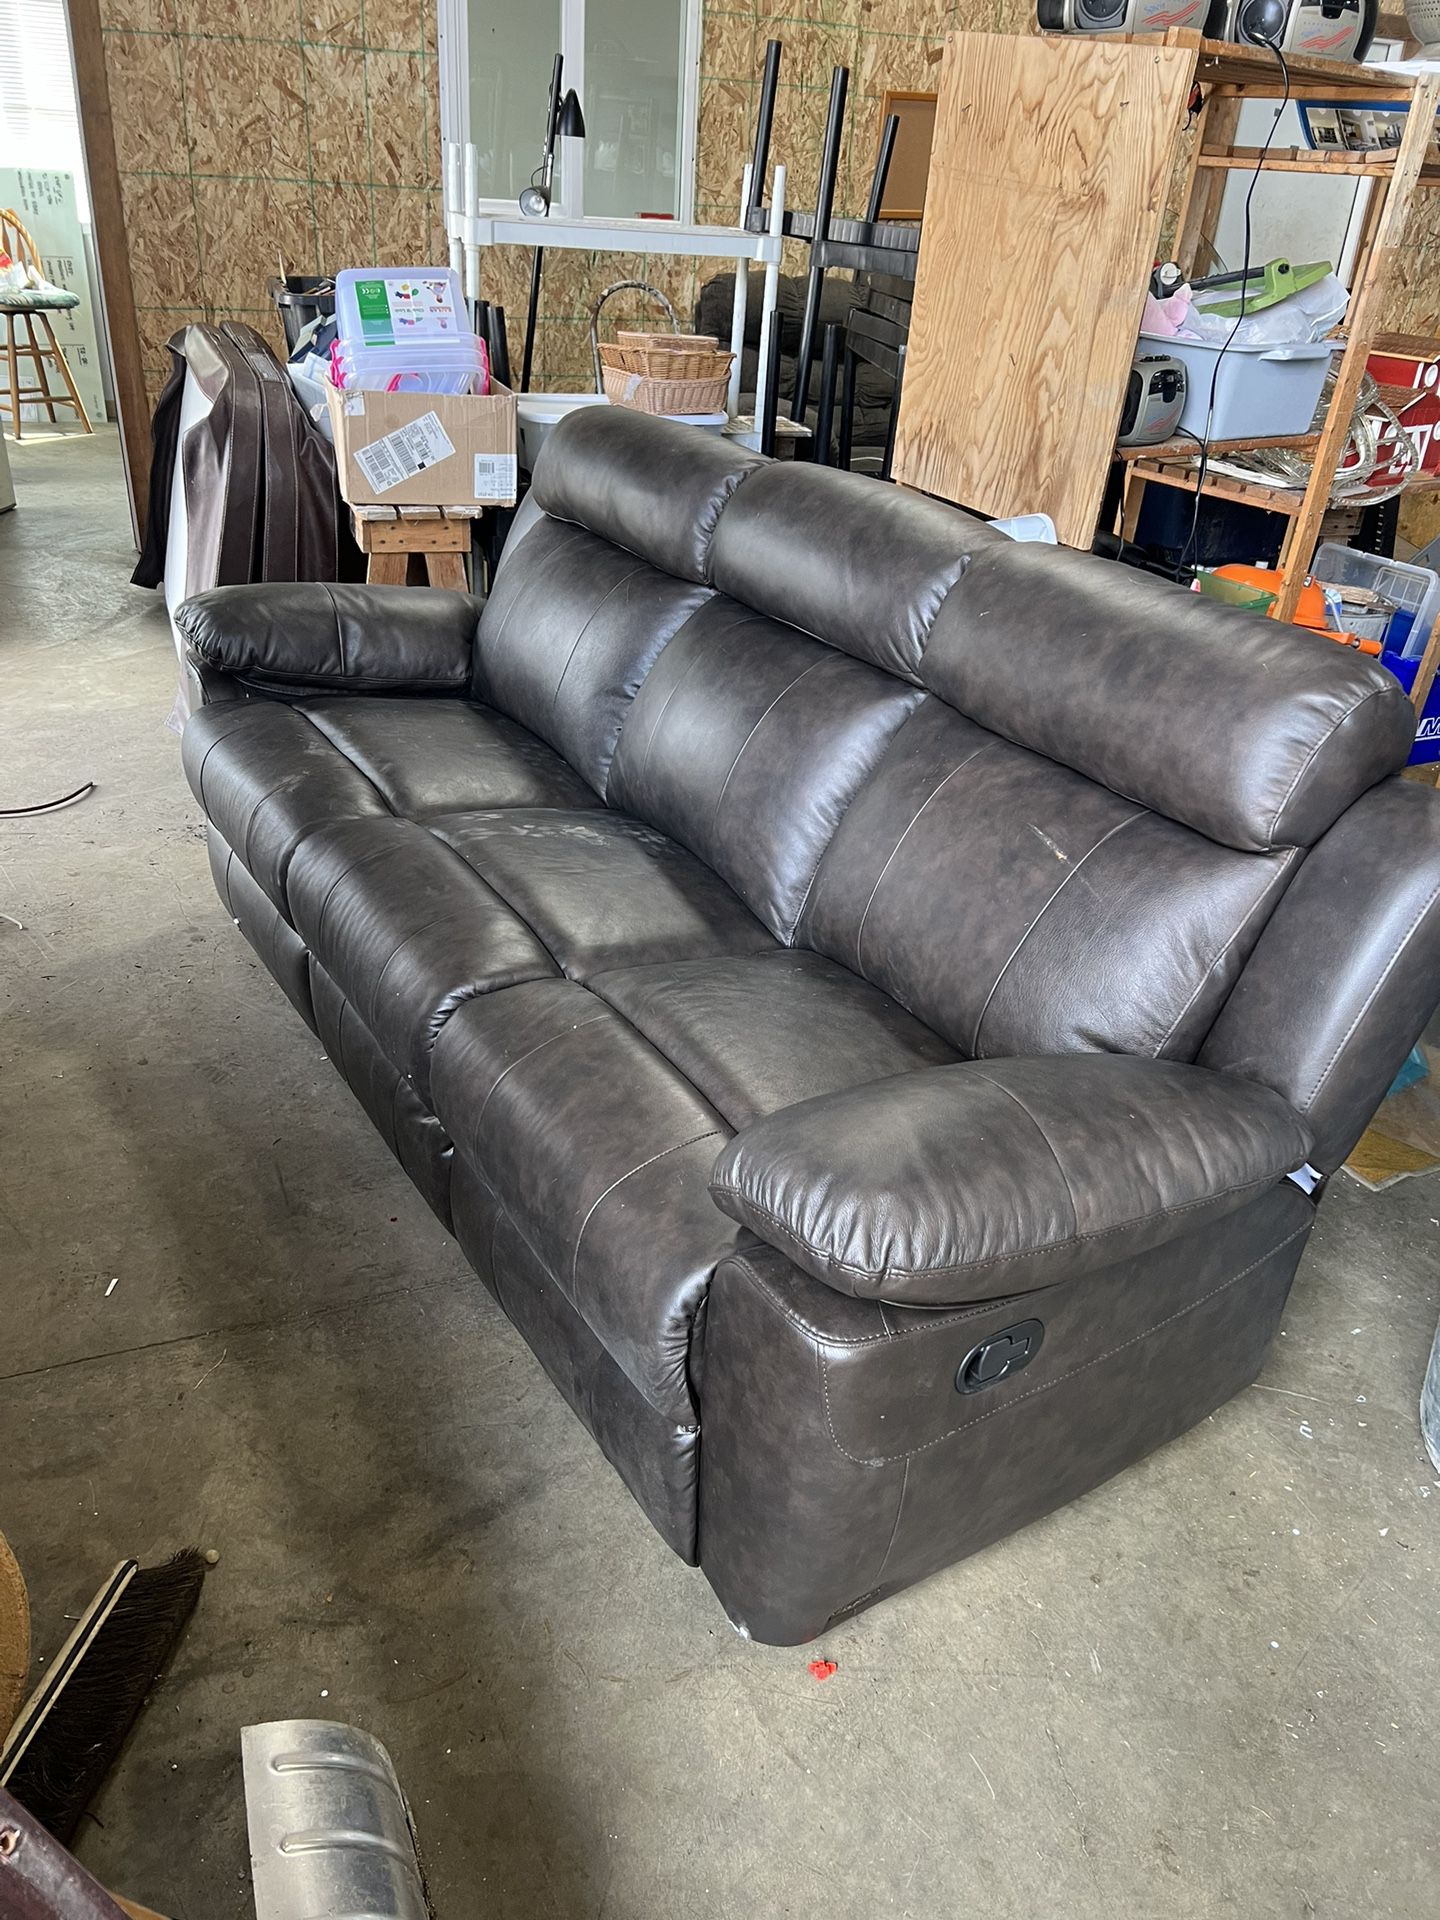 Abbyson Furniture Reclining Couch 